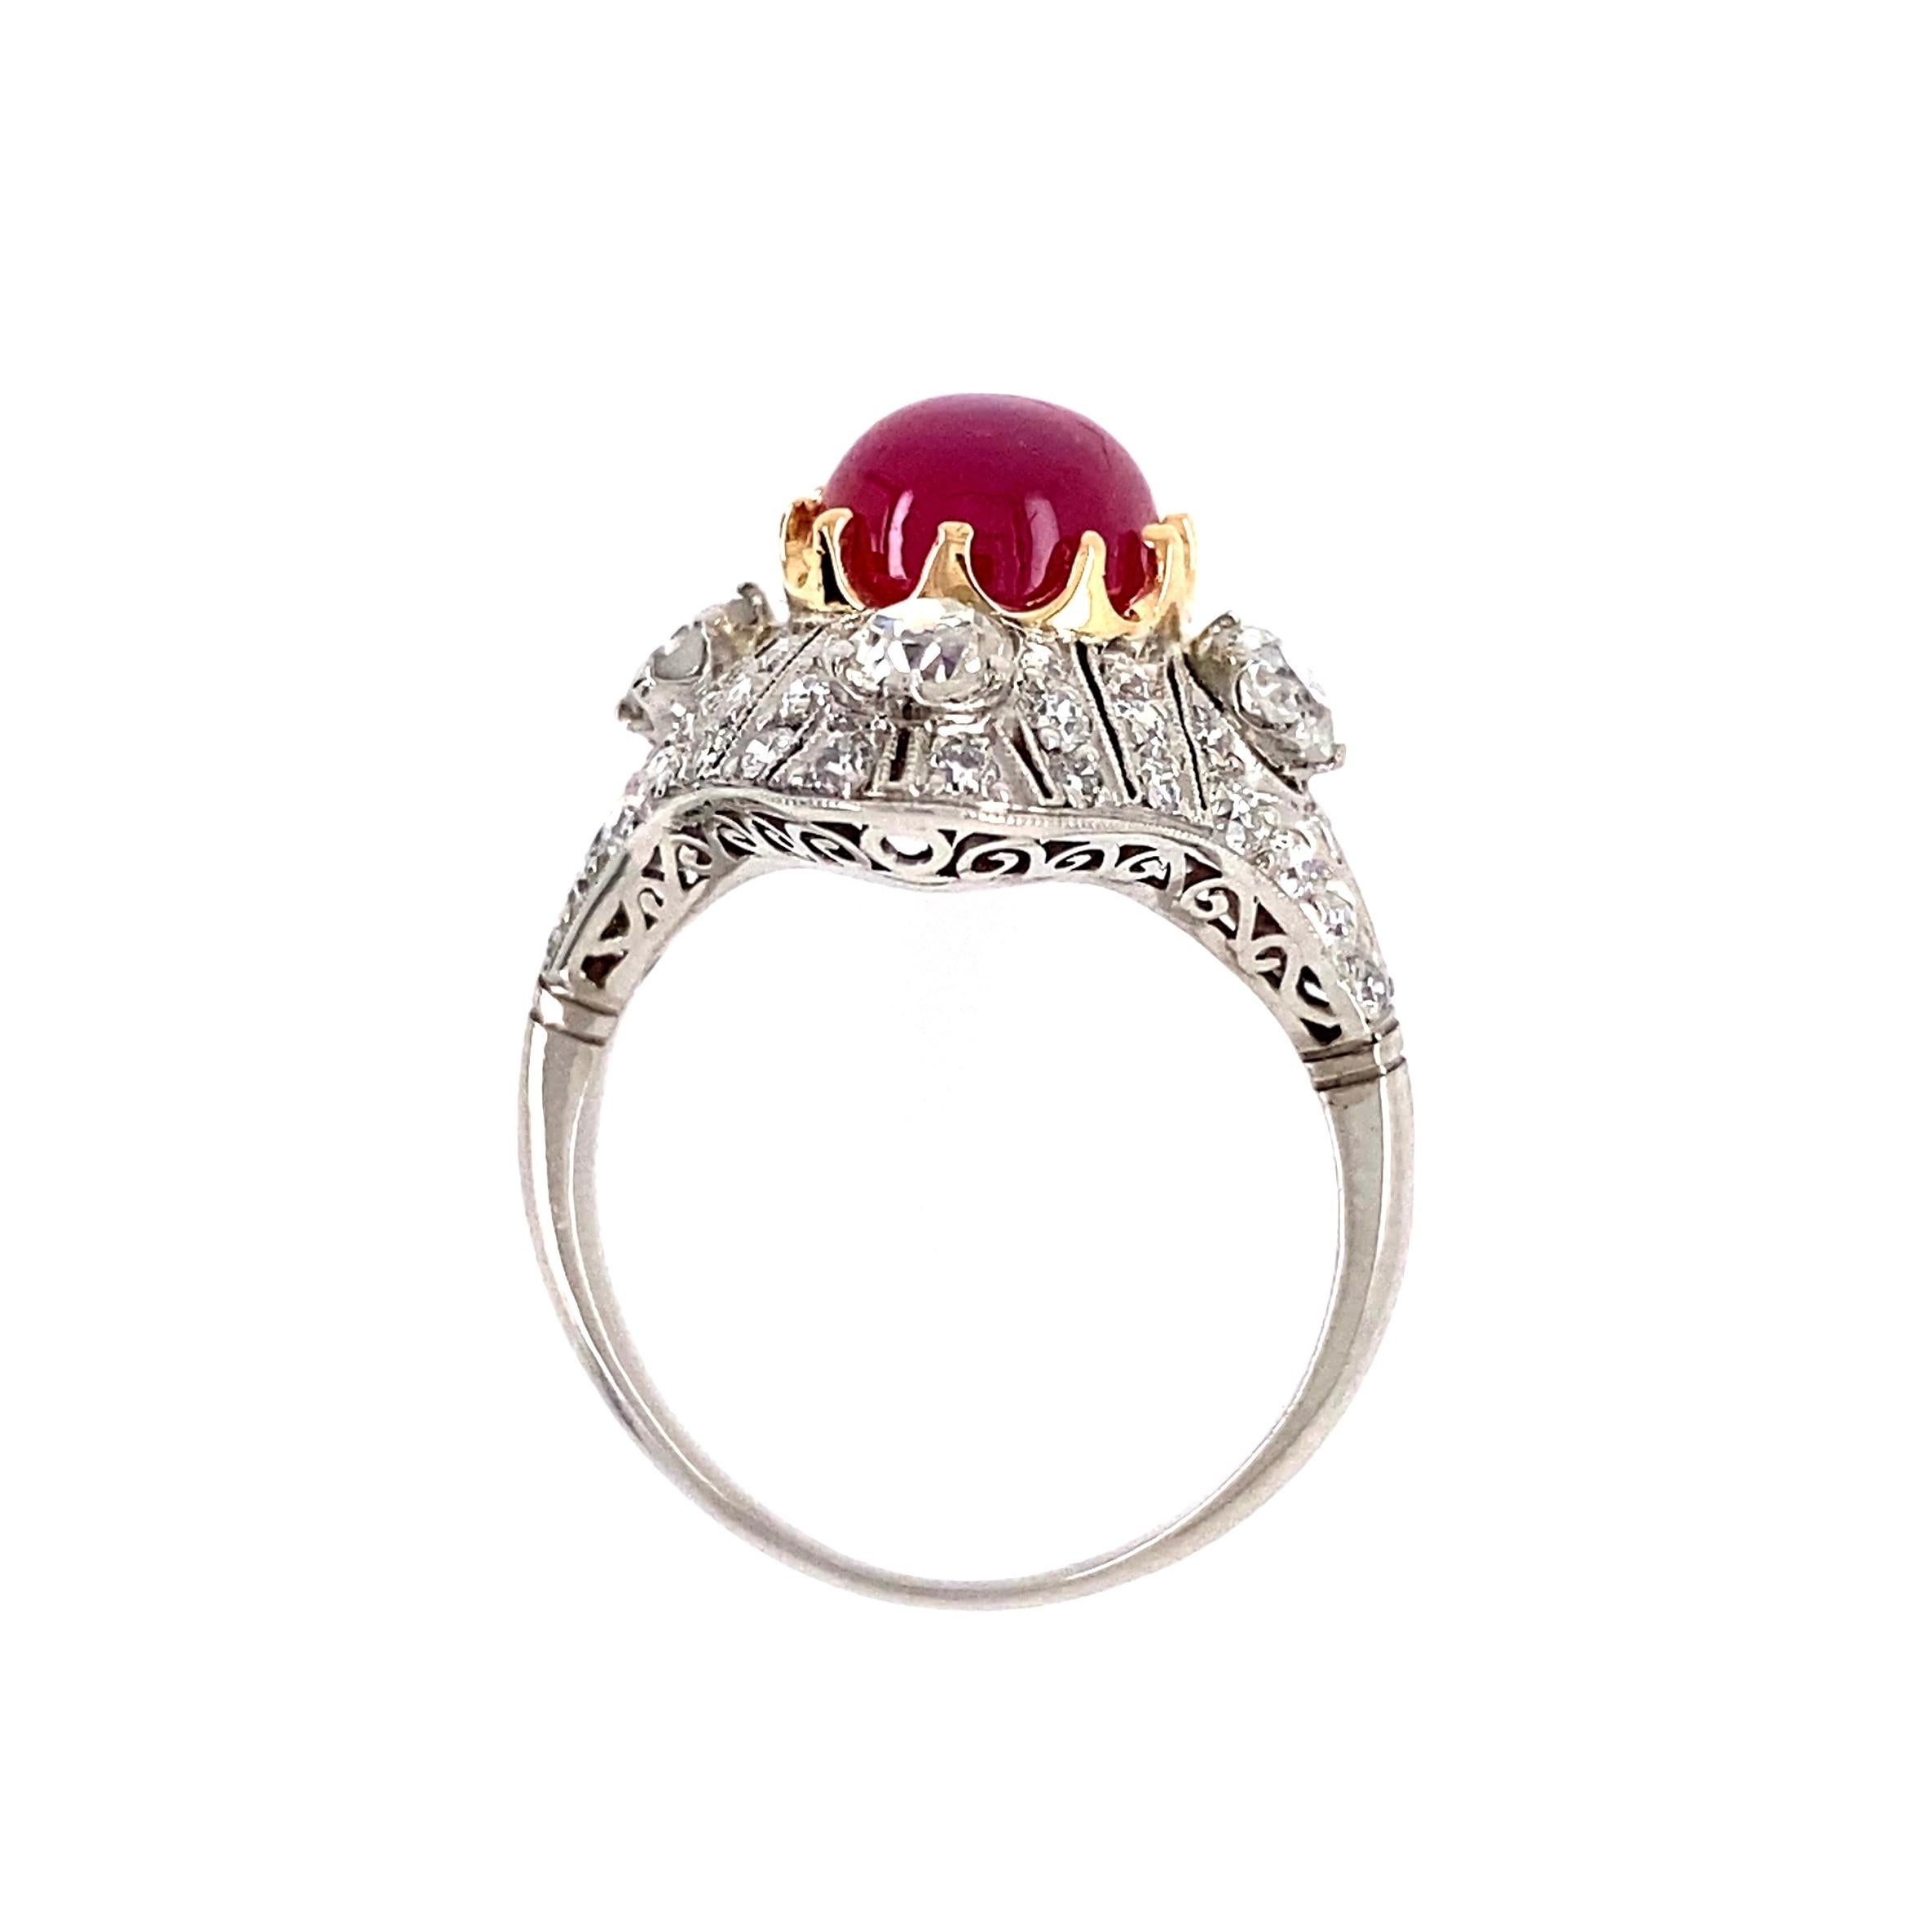 Beautiful Burmese Star Ruby and Diamond Art Deco Style Platinum Cocktail Ring, center securely set with a Burmese Star Ruby, weighing approx. 4.11 Carat, NO Heat, GIA # 2215136573; surrounded by Diamonds 1.80tcw; 4 larger old European cut diamonds